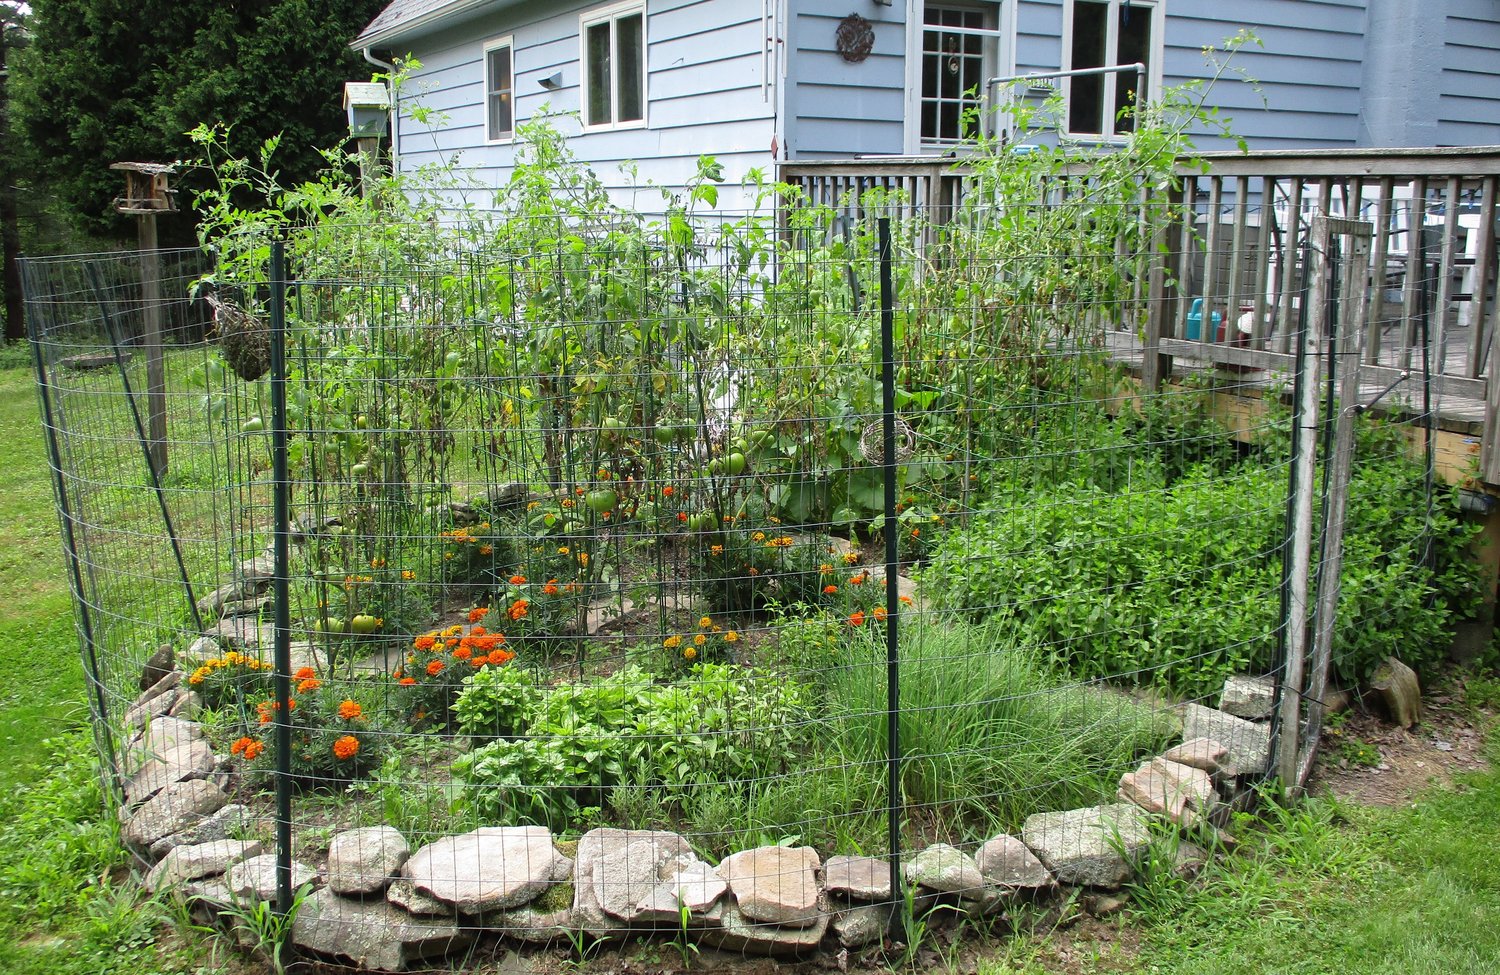 Jude's vegetable and herb garden, late July